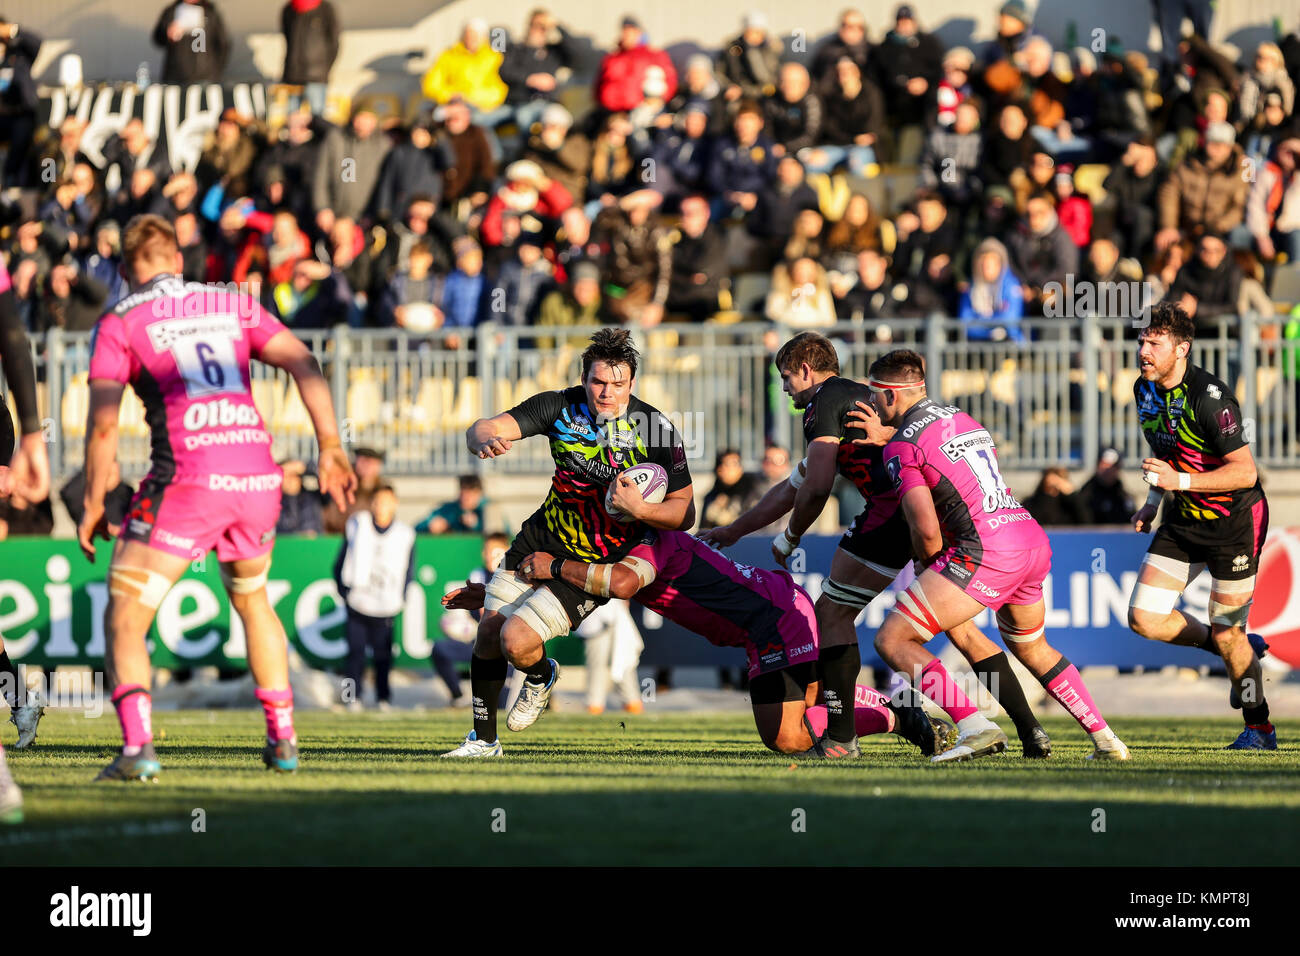 Parma, Italy. 9h December 2017. Zebre's lock David Sisi carries the ball in the match against Gloucester in EPCR Challenge Cup 2017/18. Massimiliano Carnabuci/Alamy Live News Stock Photo